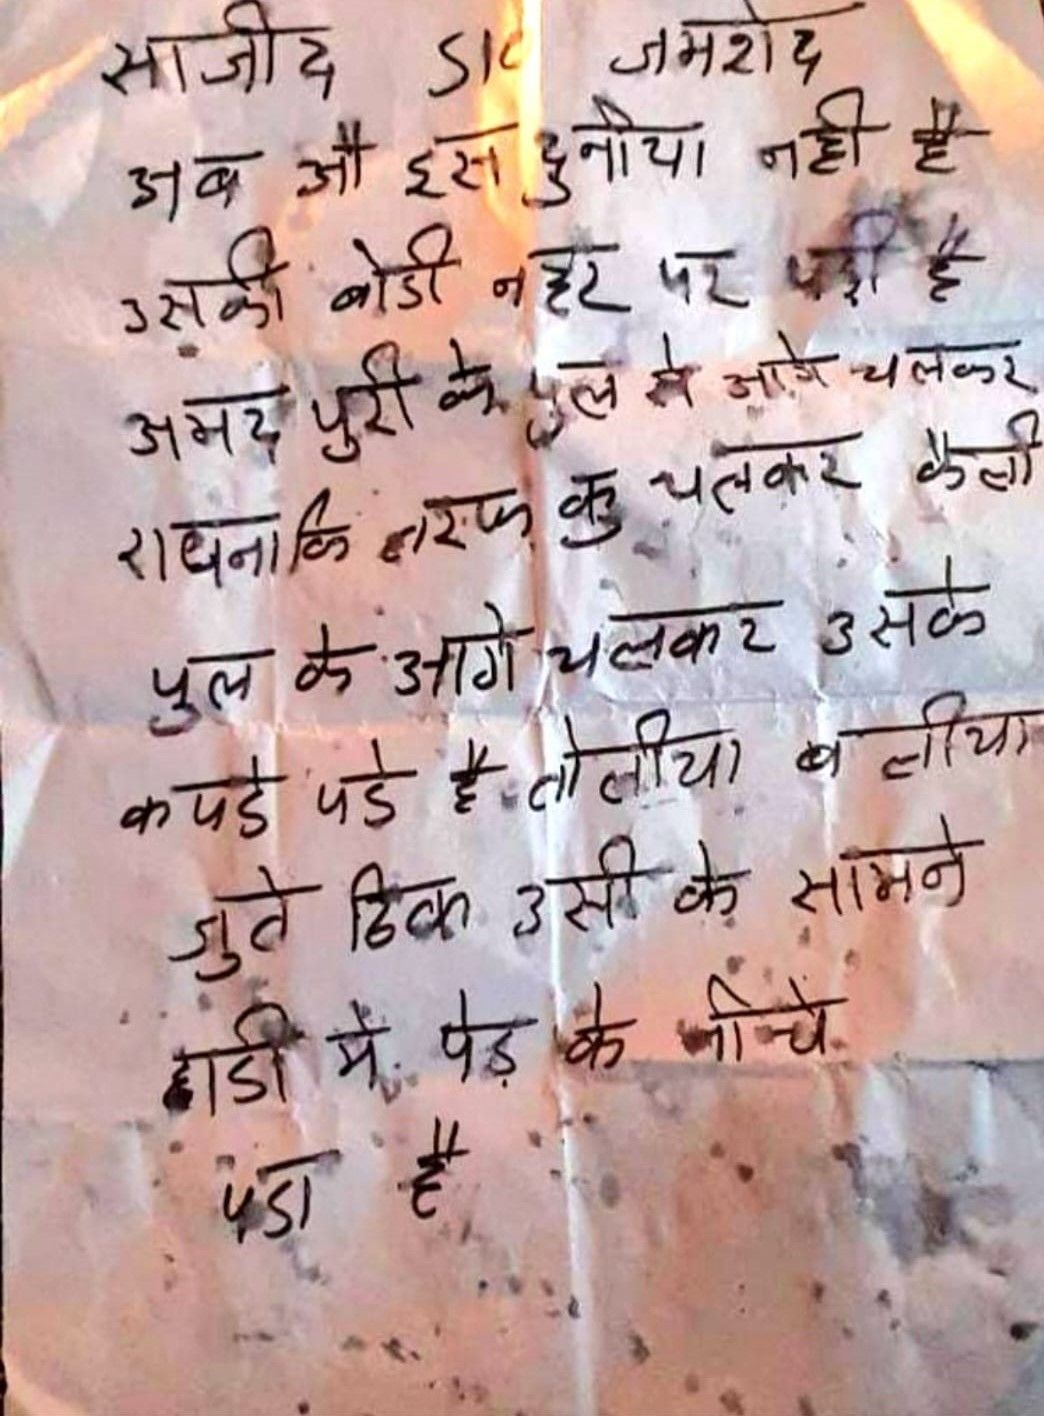 Letter in Sajid house